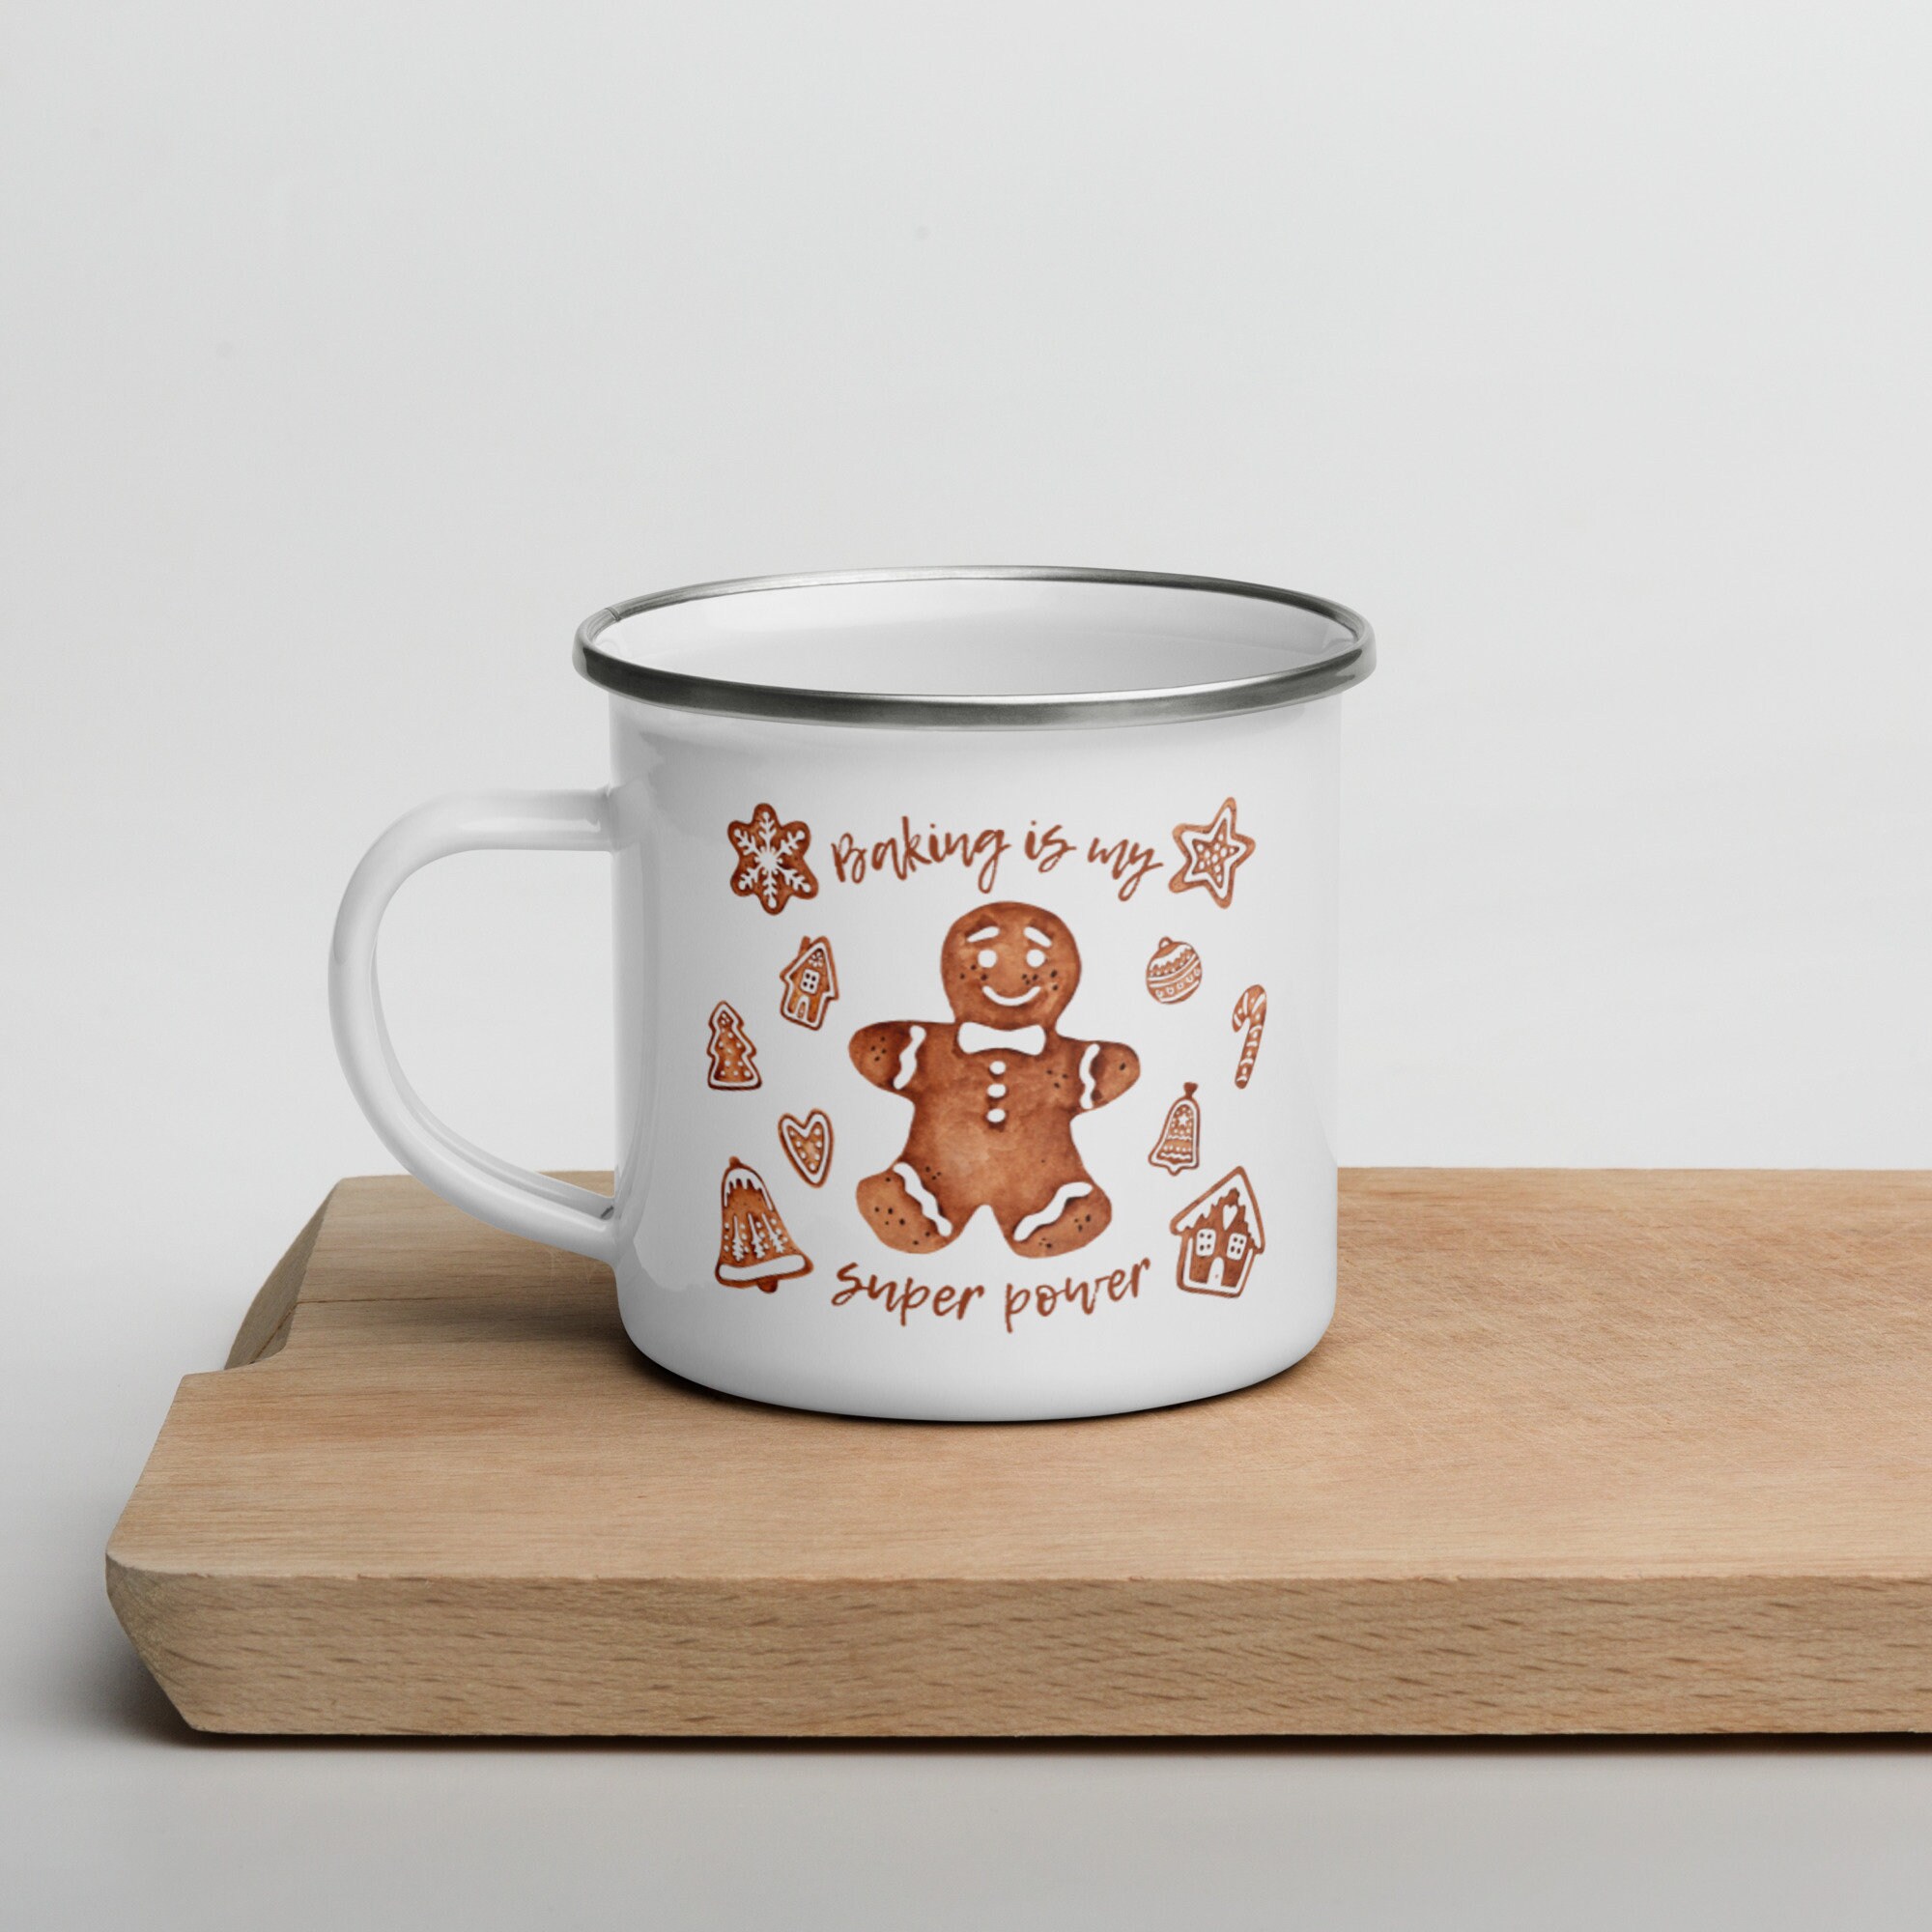  Gingerbread Man Christmas Coffee Mug Ceramic Mug with Colorful  Handle Microwave Safe Cute Aesthetic Mugs for Women and Teen Girls Warm  Winter Holiday Unique Christmas Gifts Home Office (Red Bowknot) 